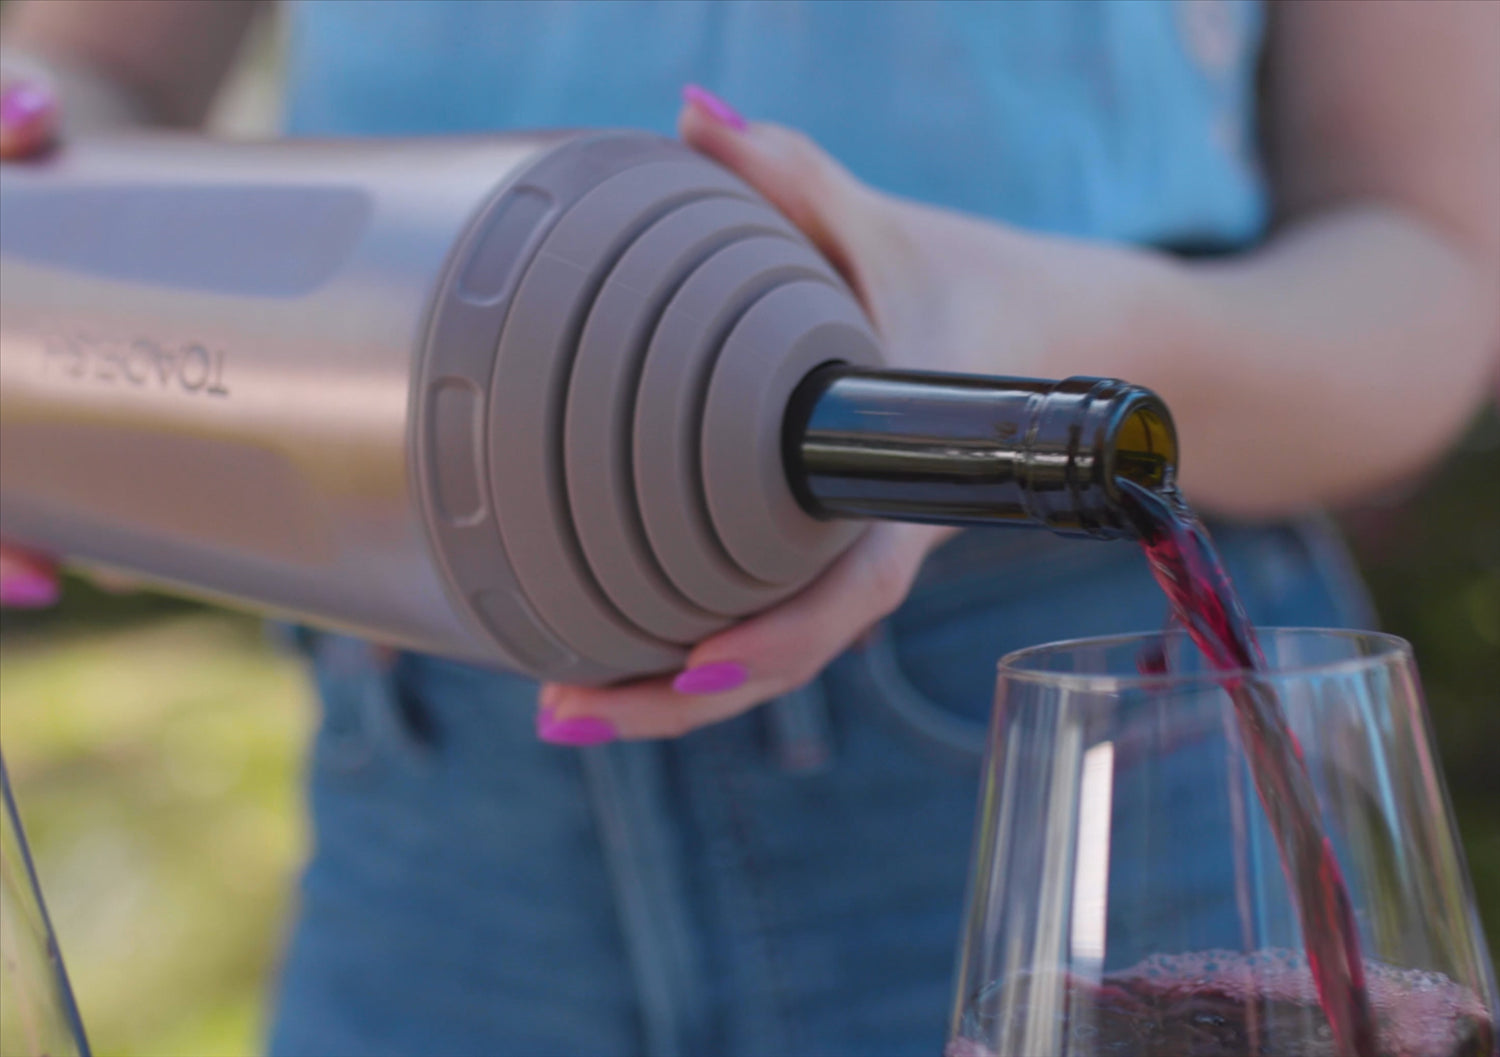 Toadfish Insulated Wine Chiller With Flexi-lock Pouring, Fits Most Bottles